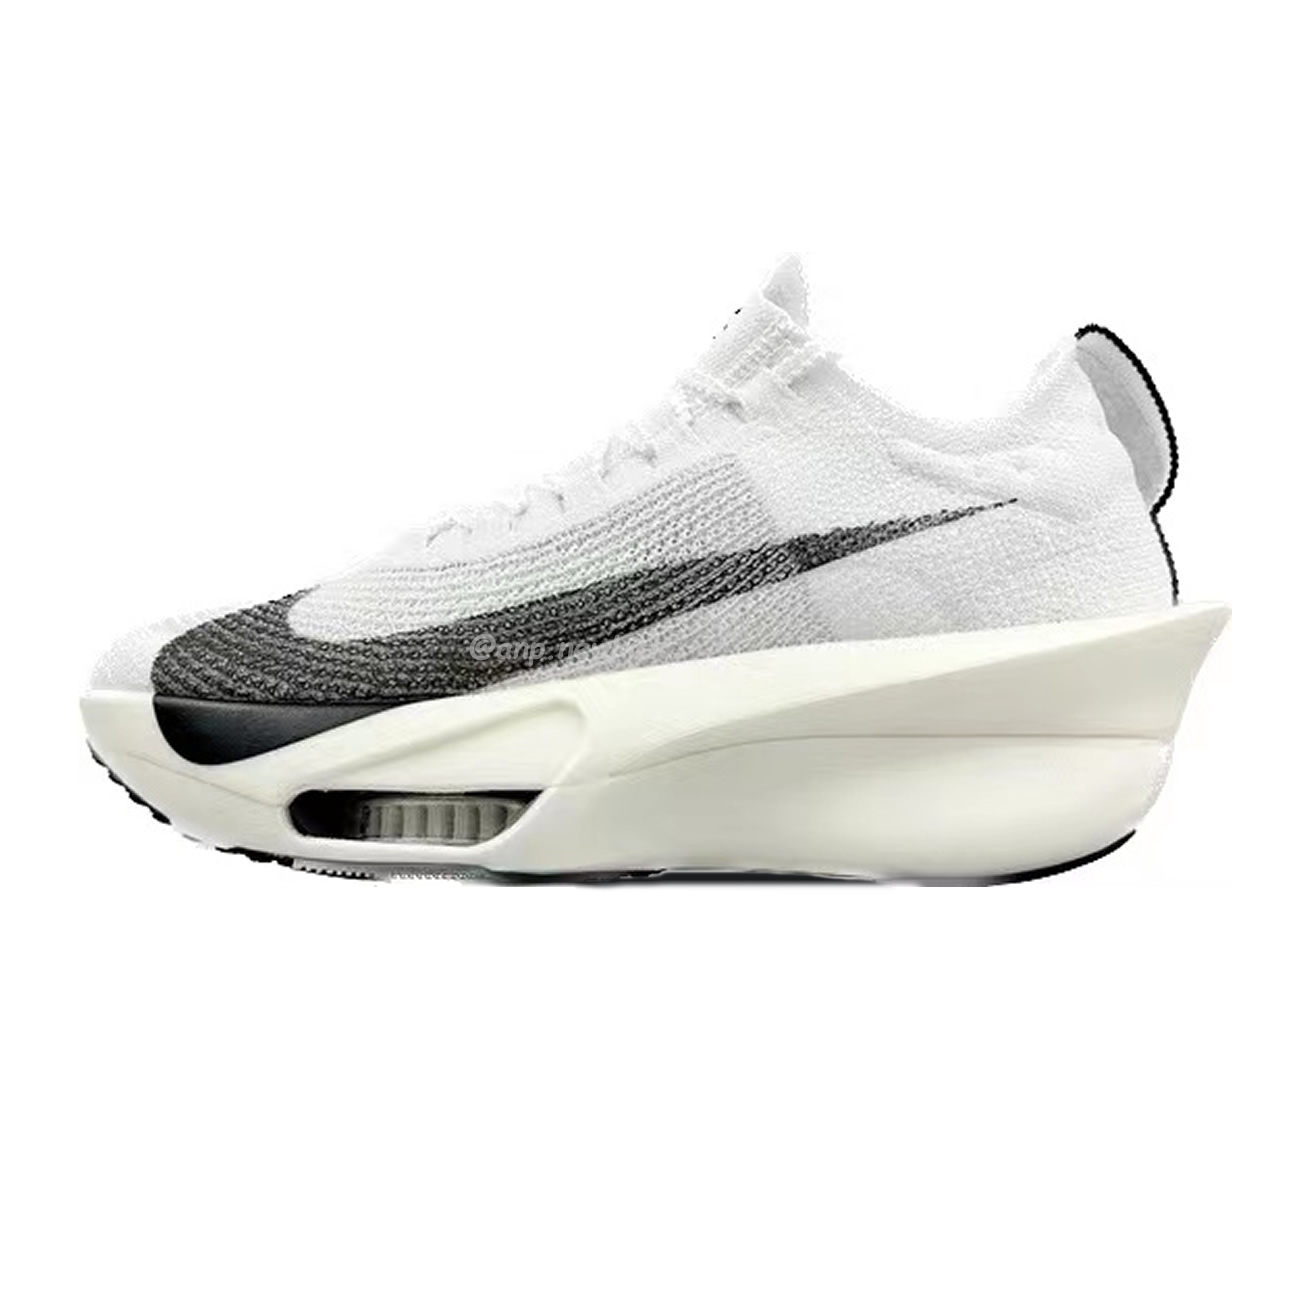 Air Nike Zoom Alphafly Next 3 Prototype Fd8356 100 Concord Fd8311 700 (5) - newkick.org